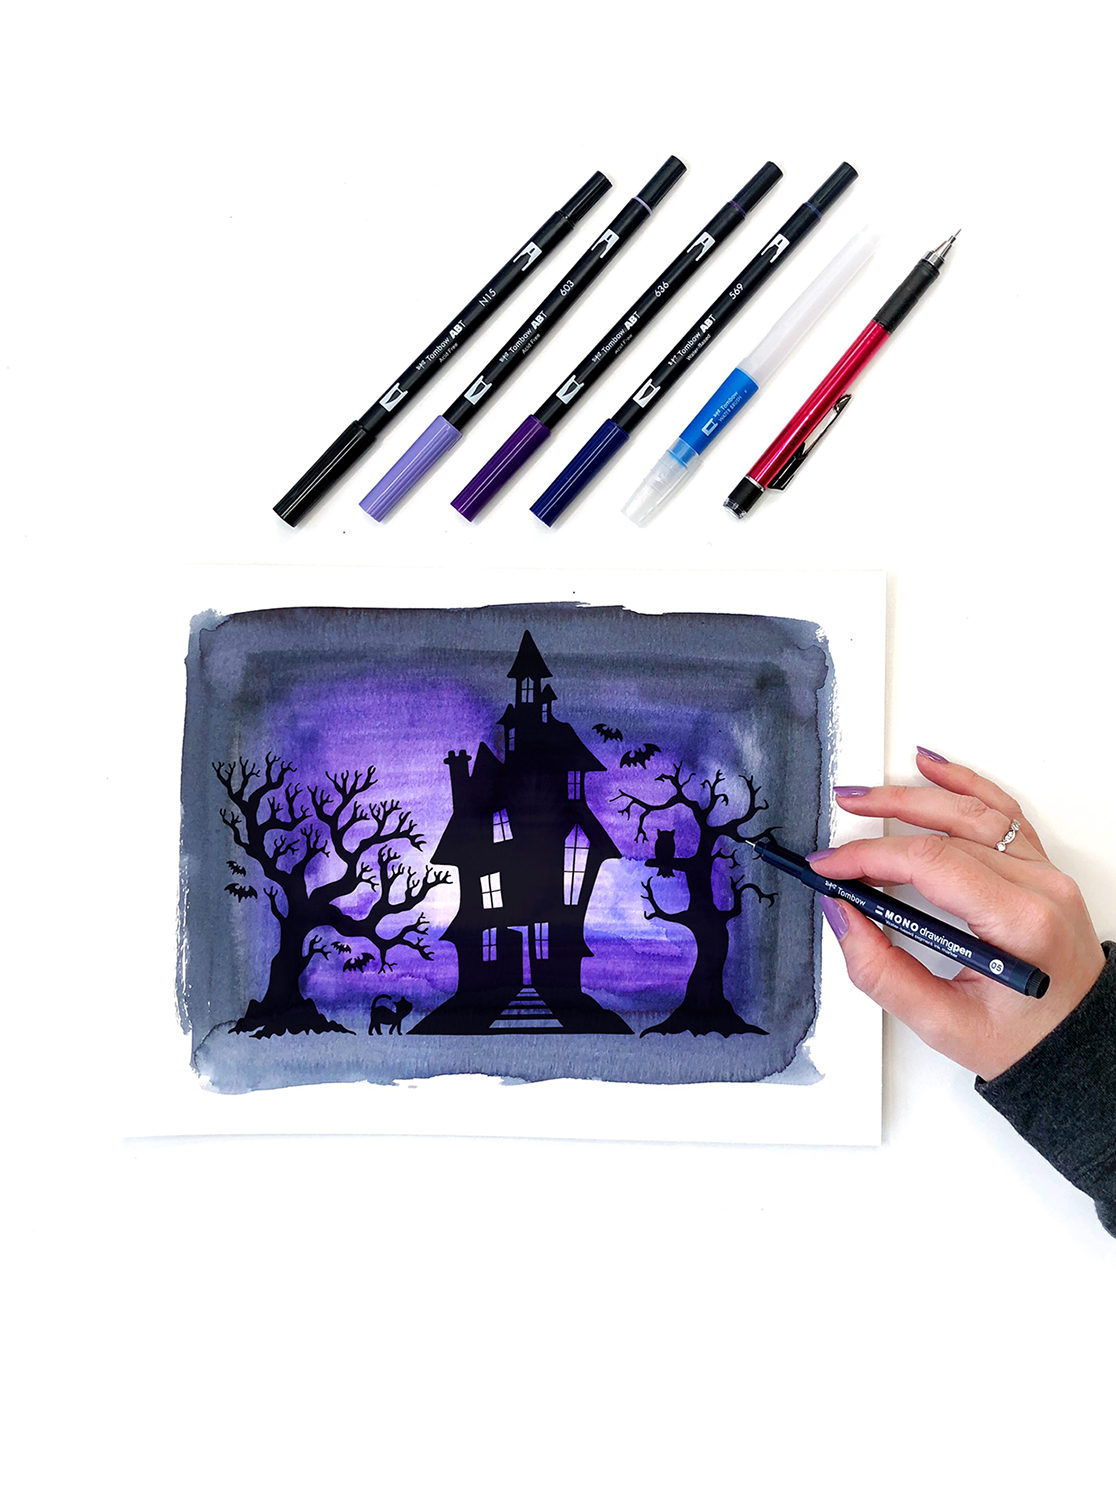 Haunted House Silhouette by Jessica Mack on behalf of Tombow